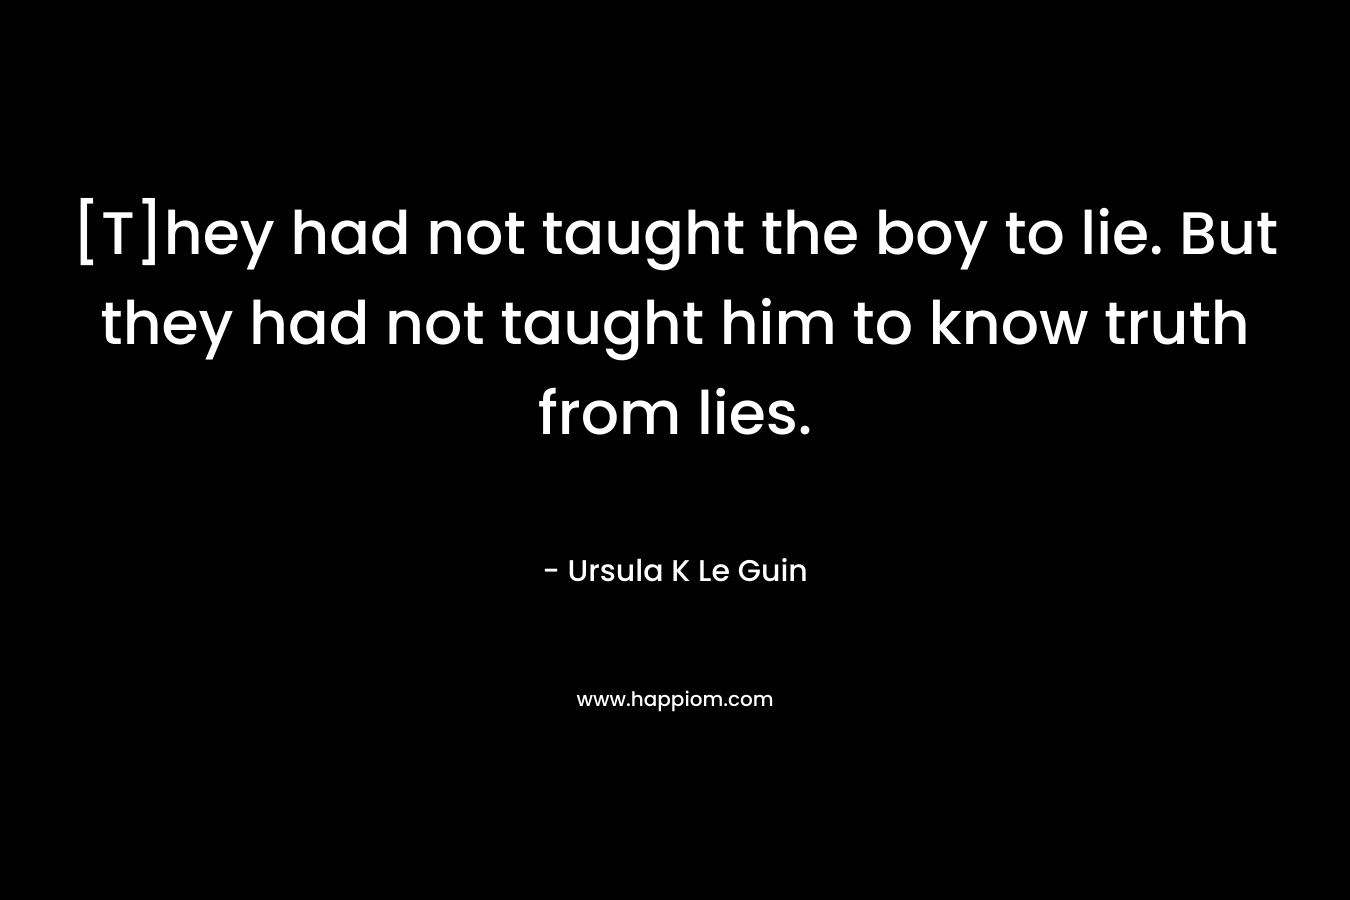 [T]hey had not taught the boy to lie. But they had not taught him to know truth from lies.